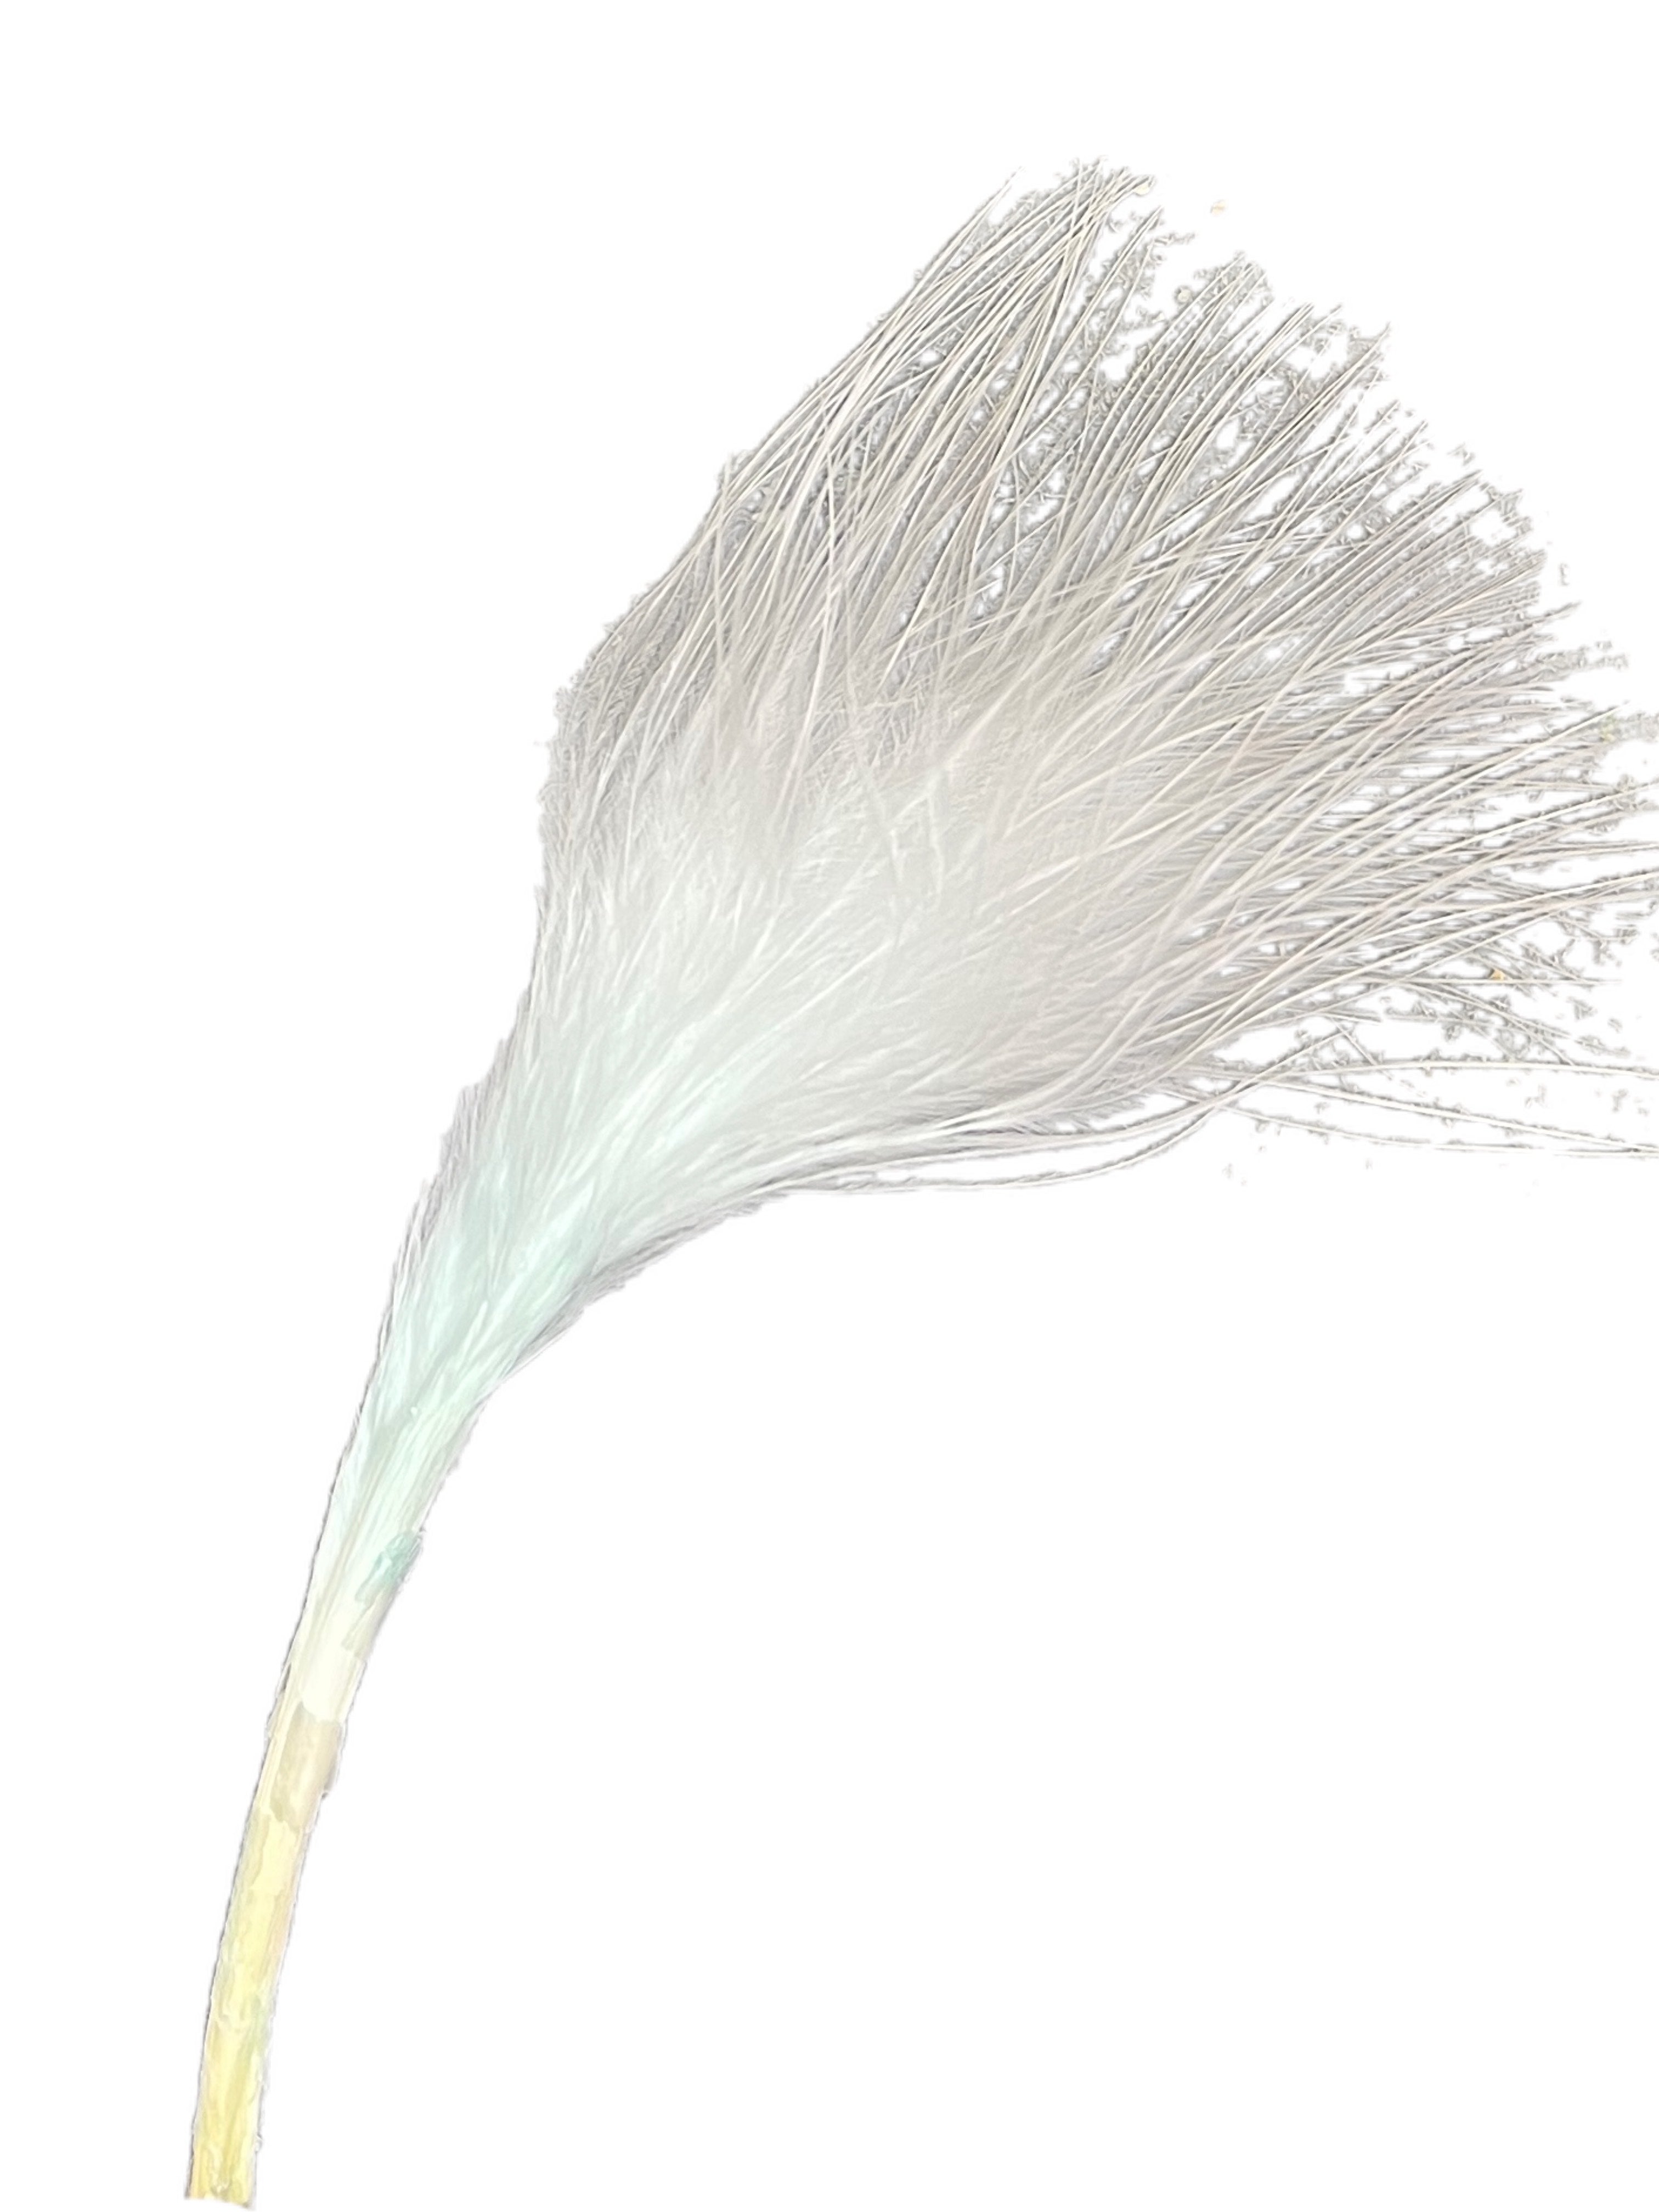 Club Green Pack of Single Feather Stems - Light Blue - Pack of approx. 36